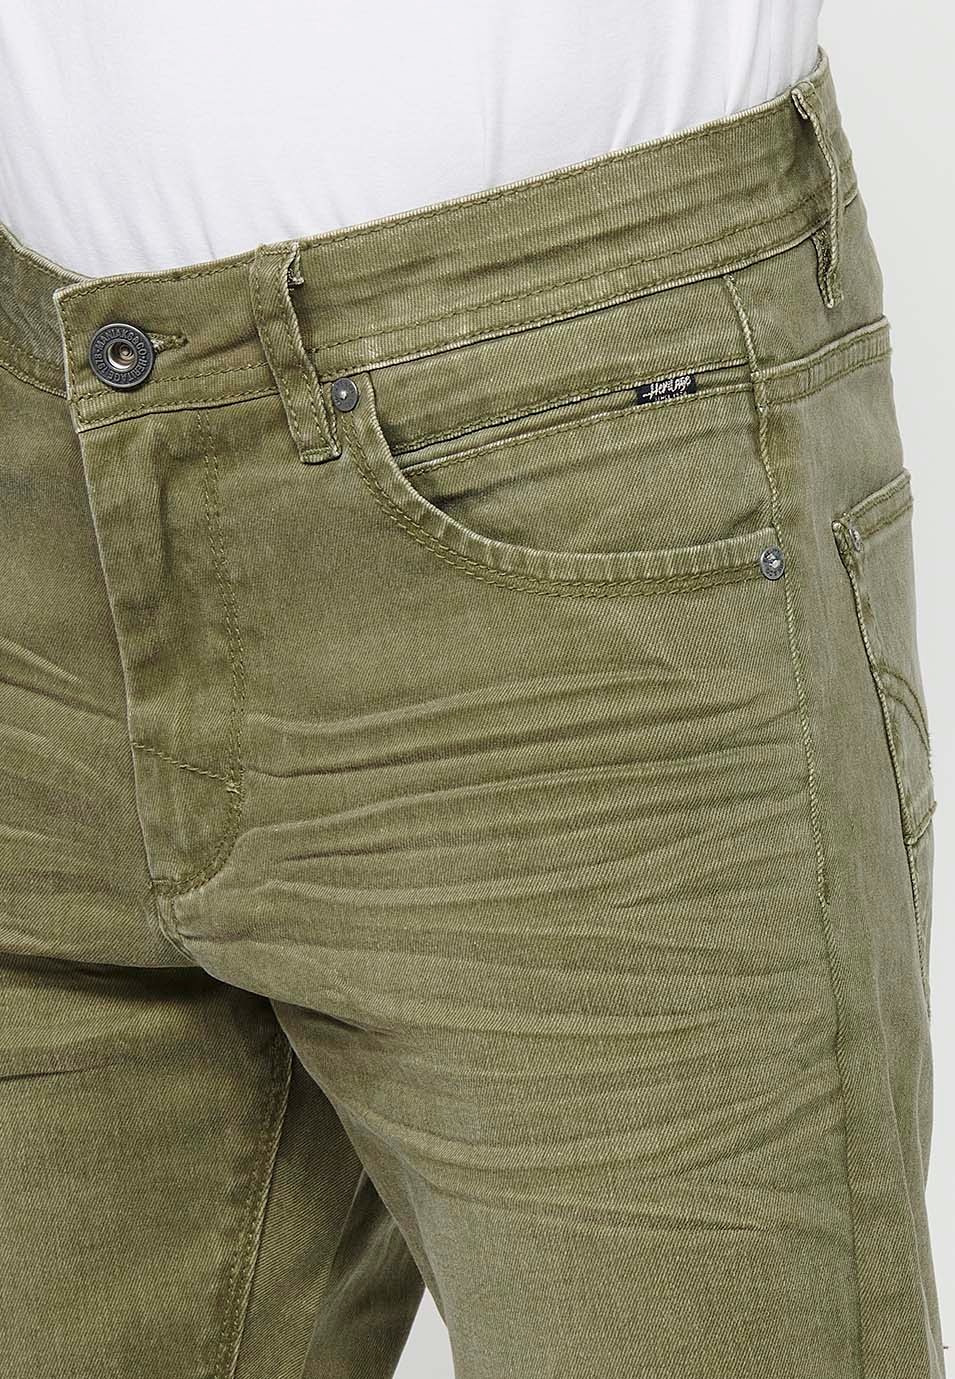 Denim Bermuda shorts with turn-up finish, front closure with zipper and button with five pockets, one pocket pocket, Olive Color for Men 9